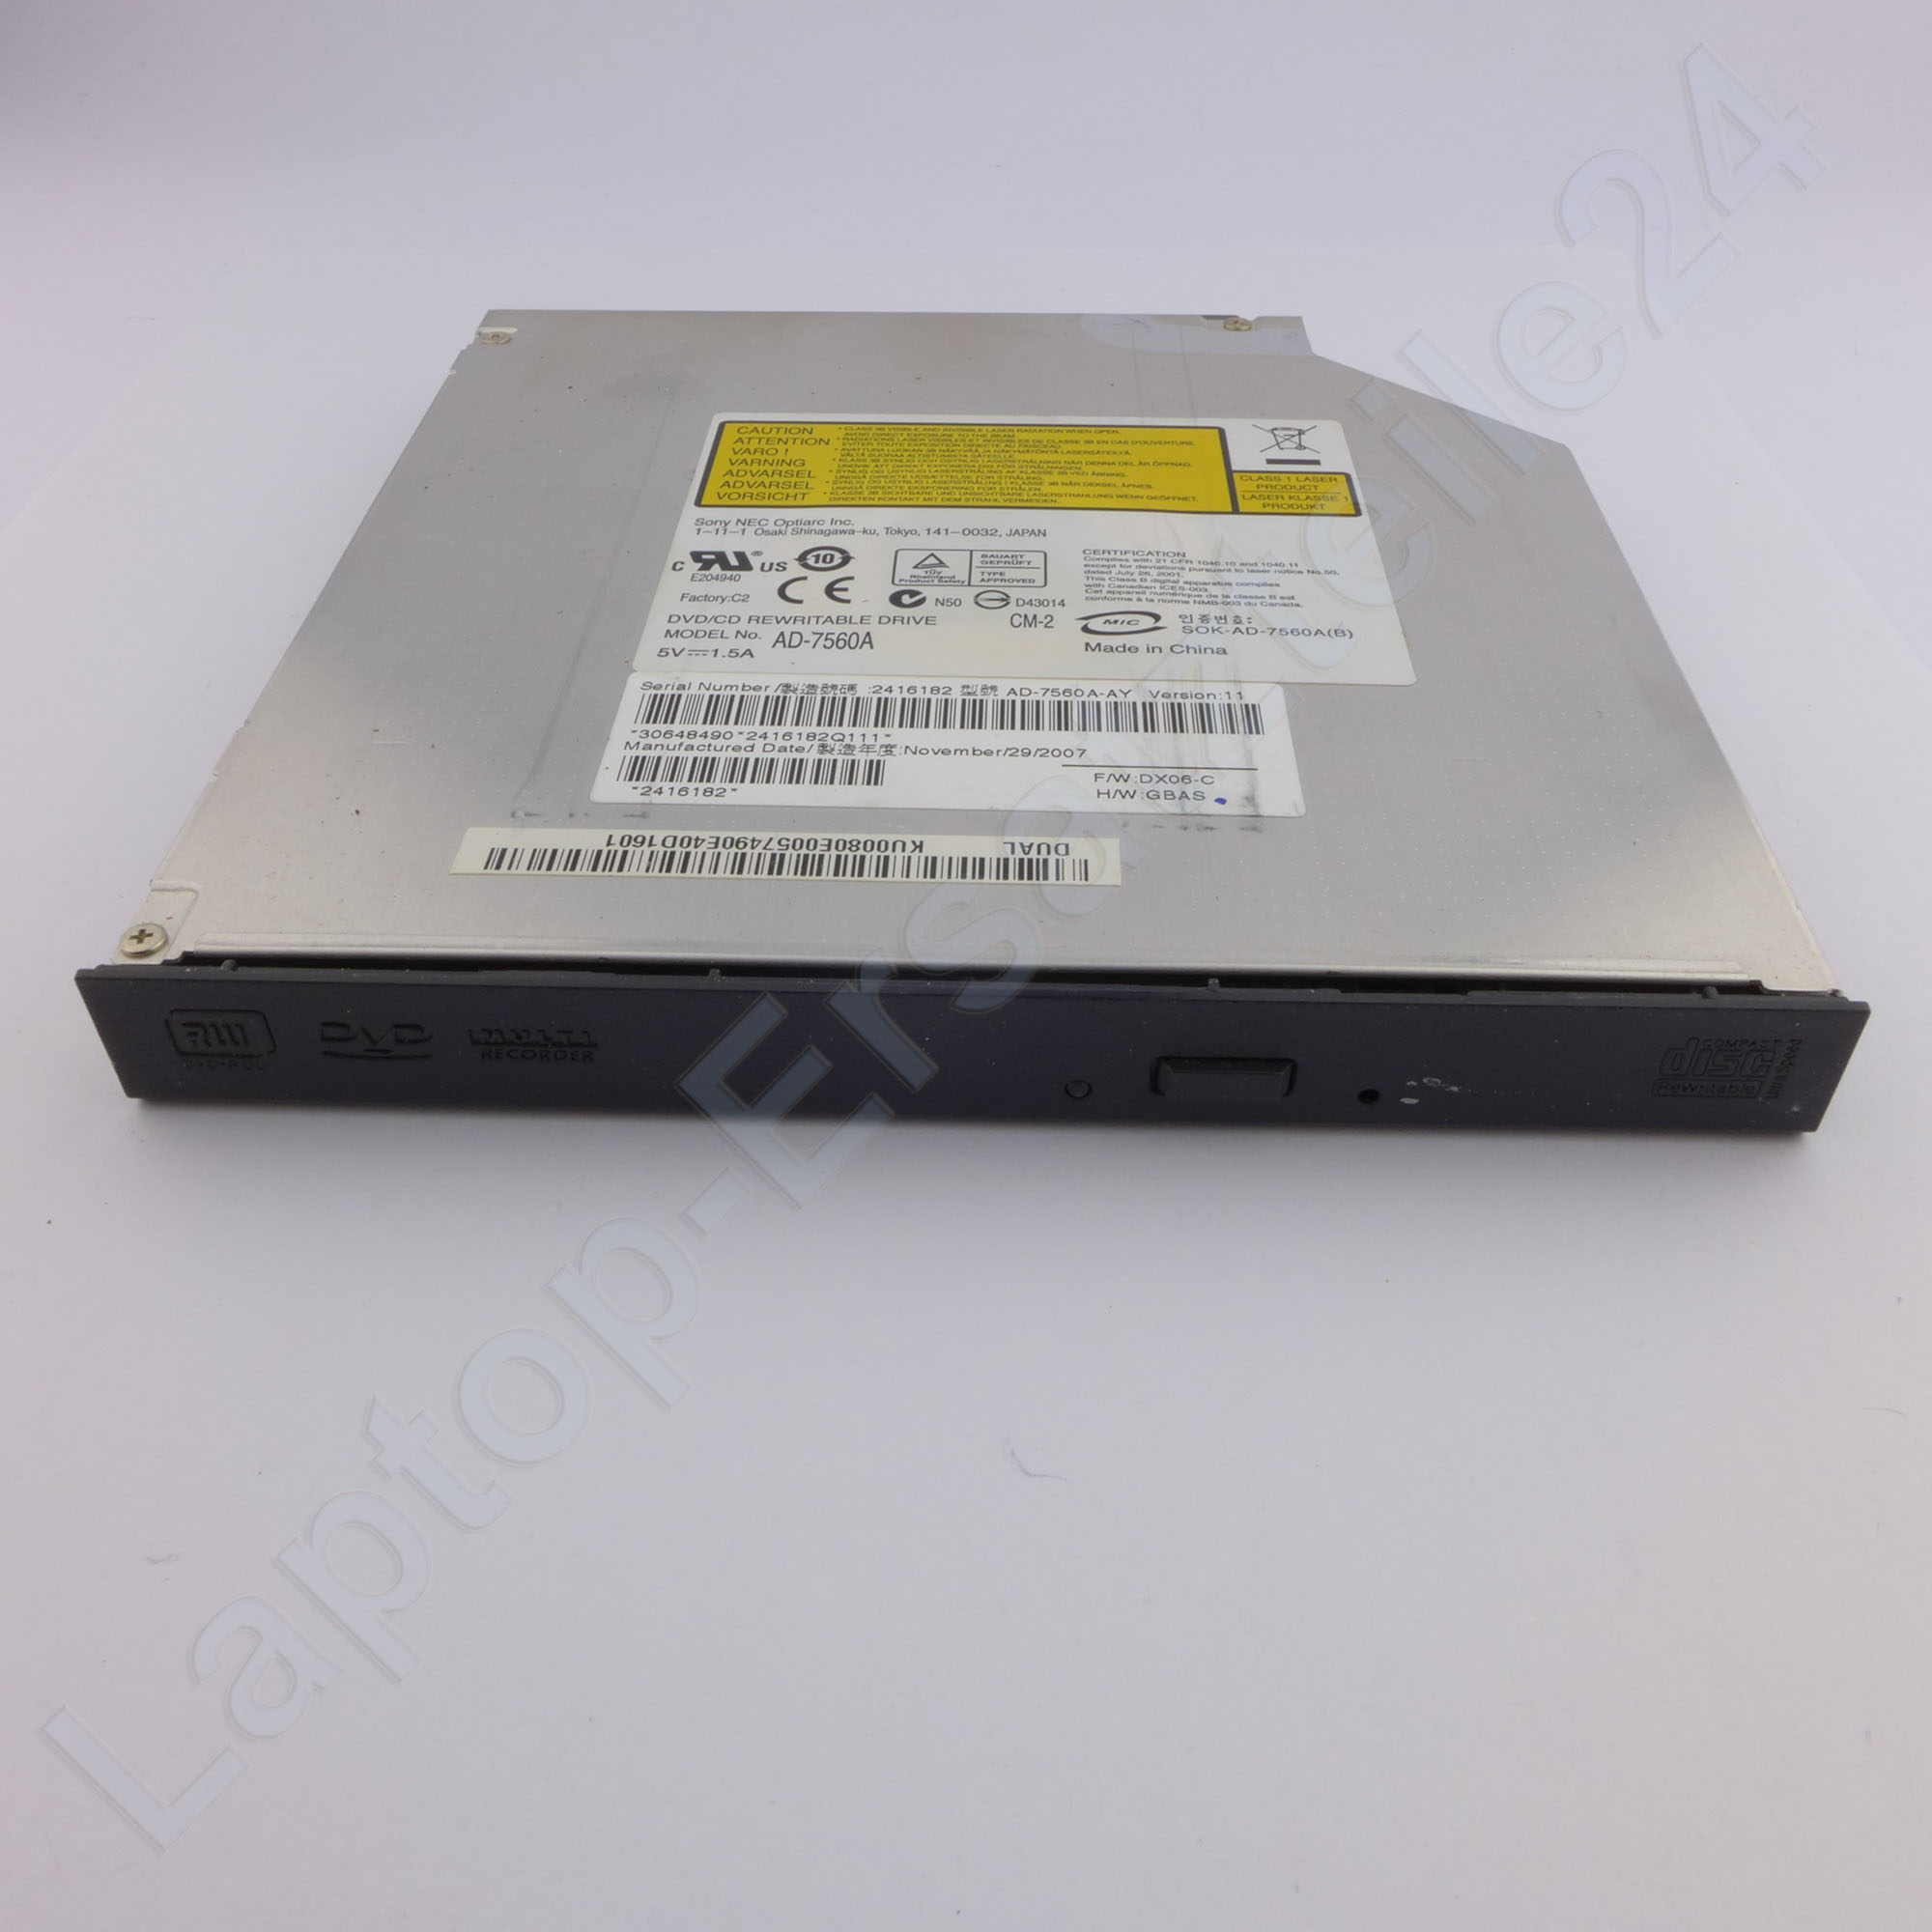 Acer Aspire 5520 Cd Drive Missing